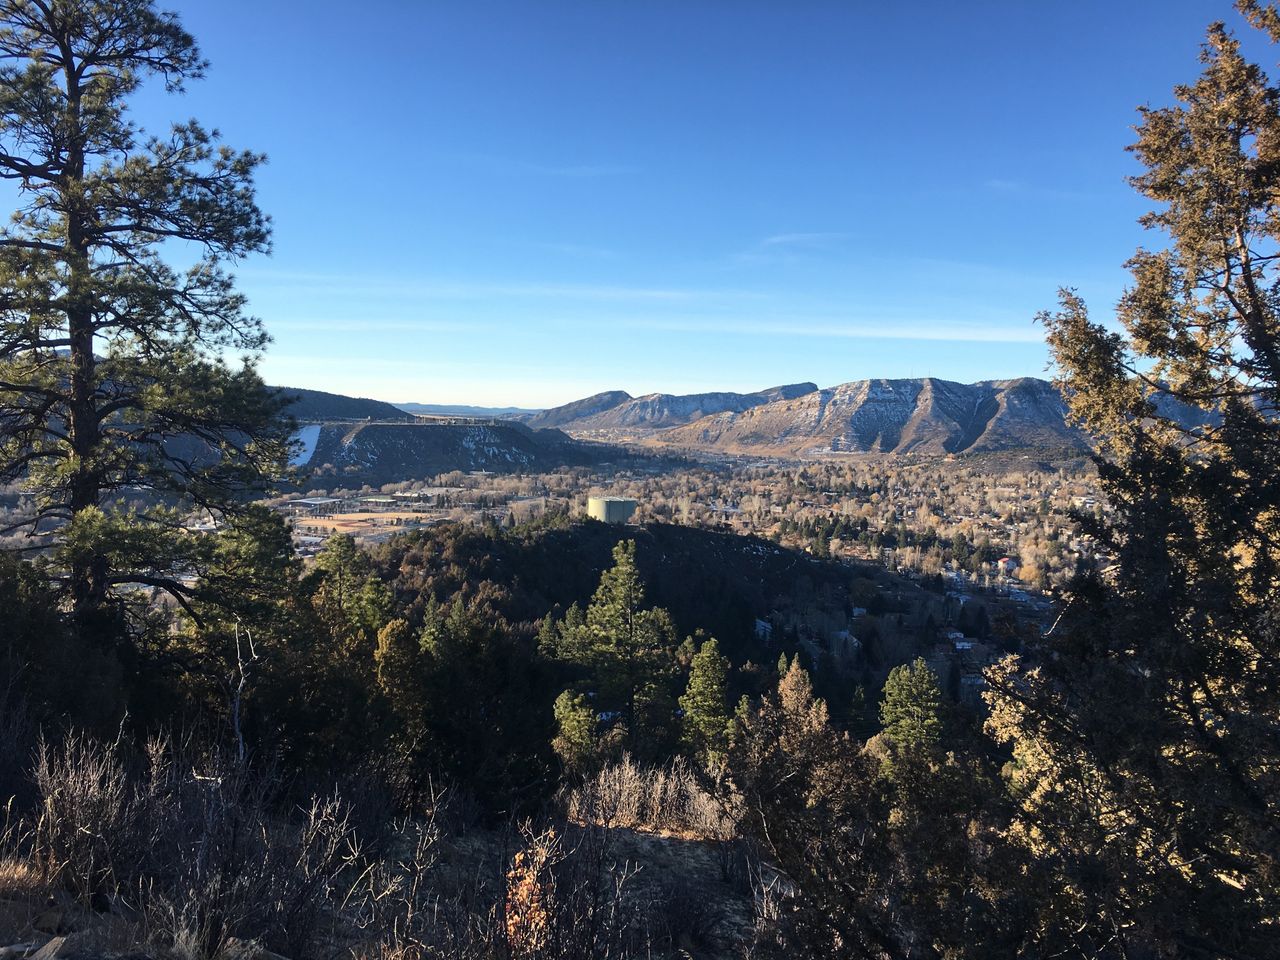 The view of Durango, Colorado, from Animas Mountain just outside of downtown.